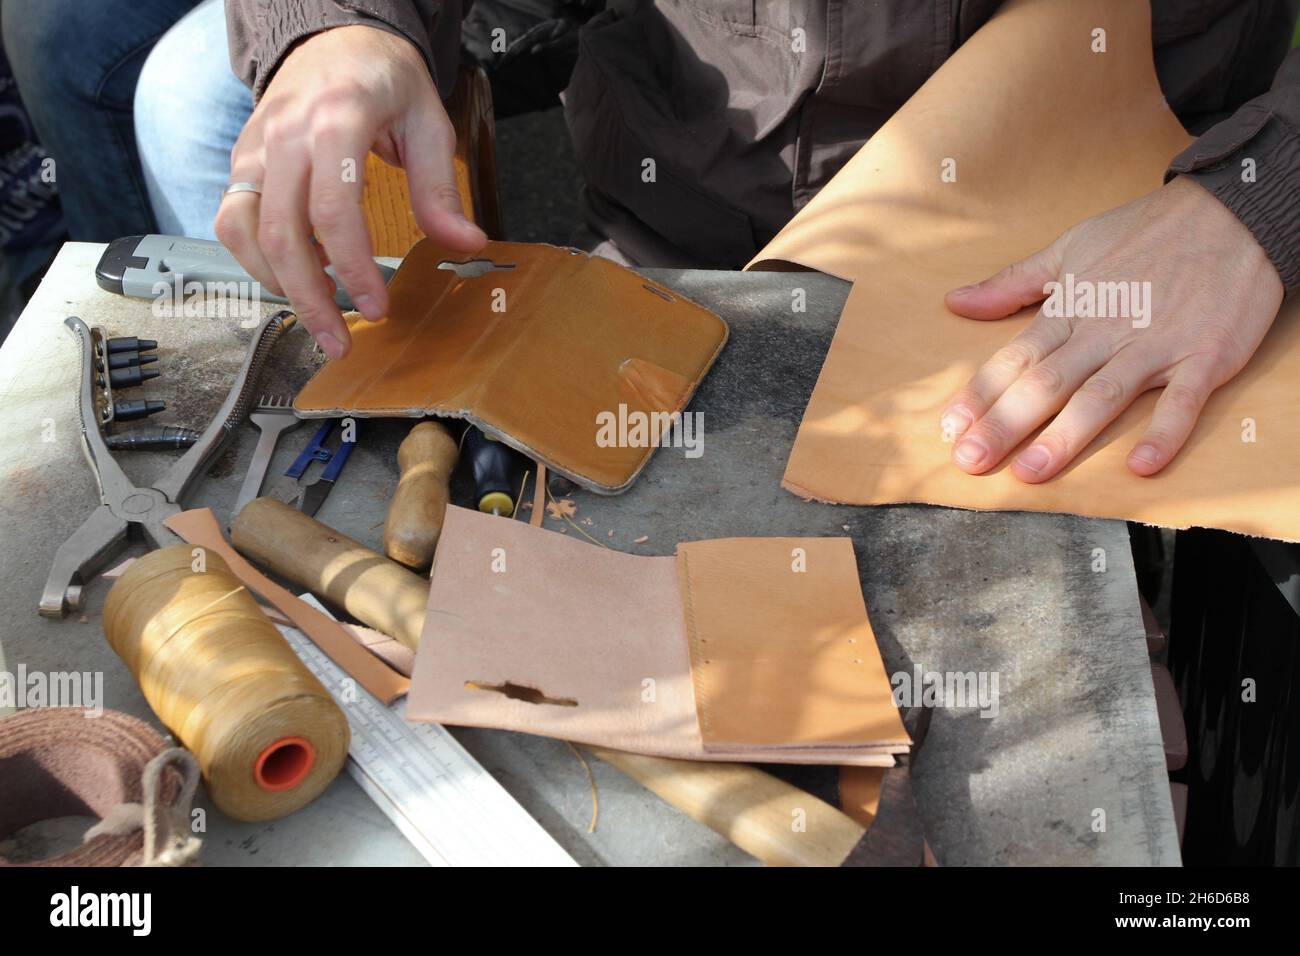 Handmade leather goods, craftsman at work in a workshop. Stock Photo